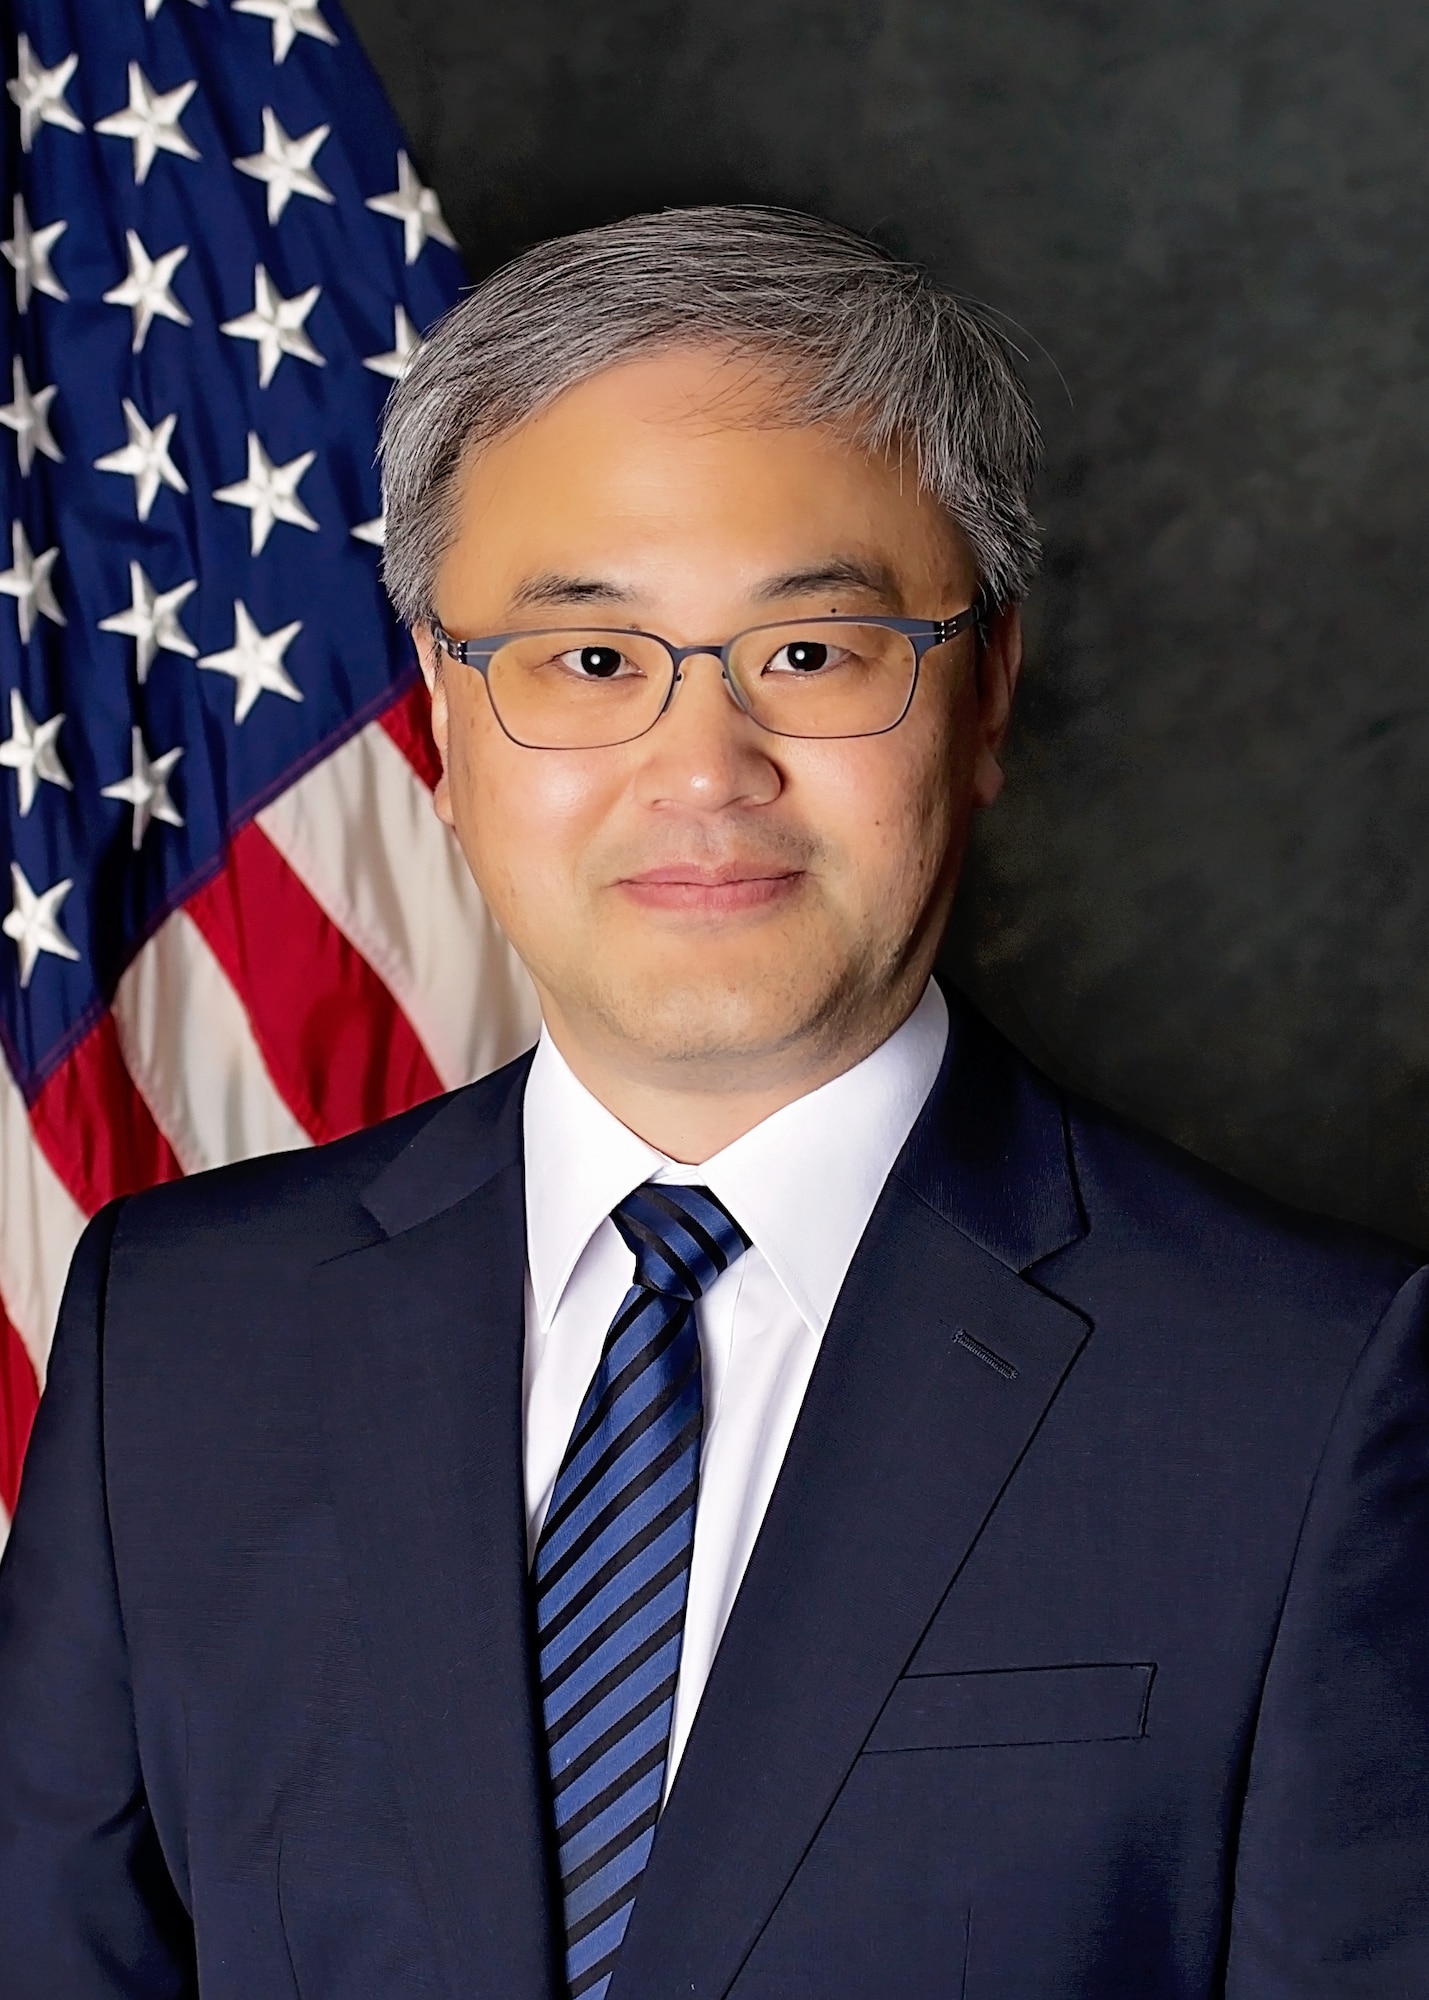 Dr. James Joo, AFRL Aerospace Systems Directorate Advanced Structural Concepts team lead, received the Engineer/Scientist of the Year award from the Society of Asian Scientists and Engineers for his work with advanced aircraft structural concept designs. (U.S. Air Force photo)